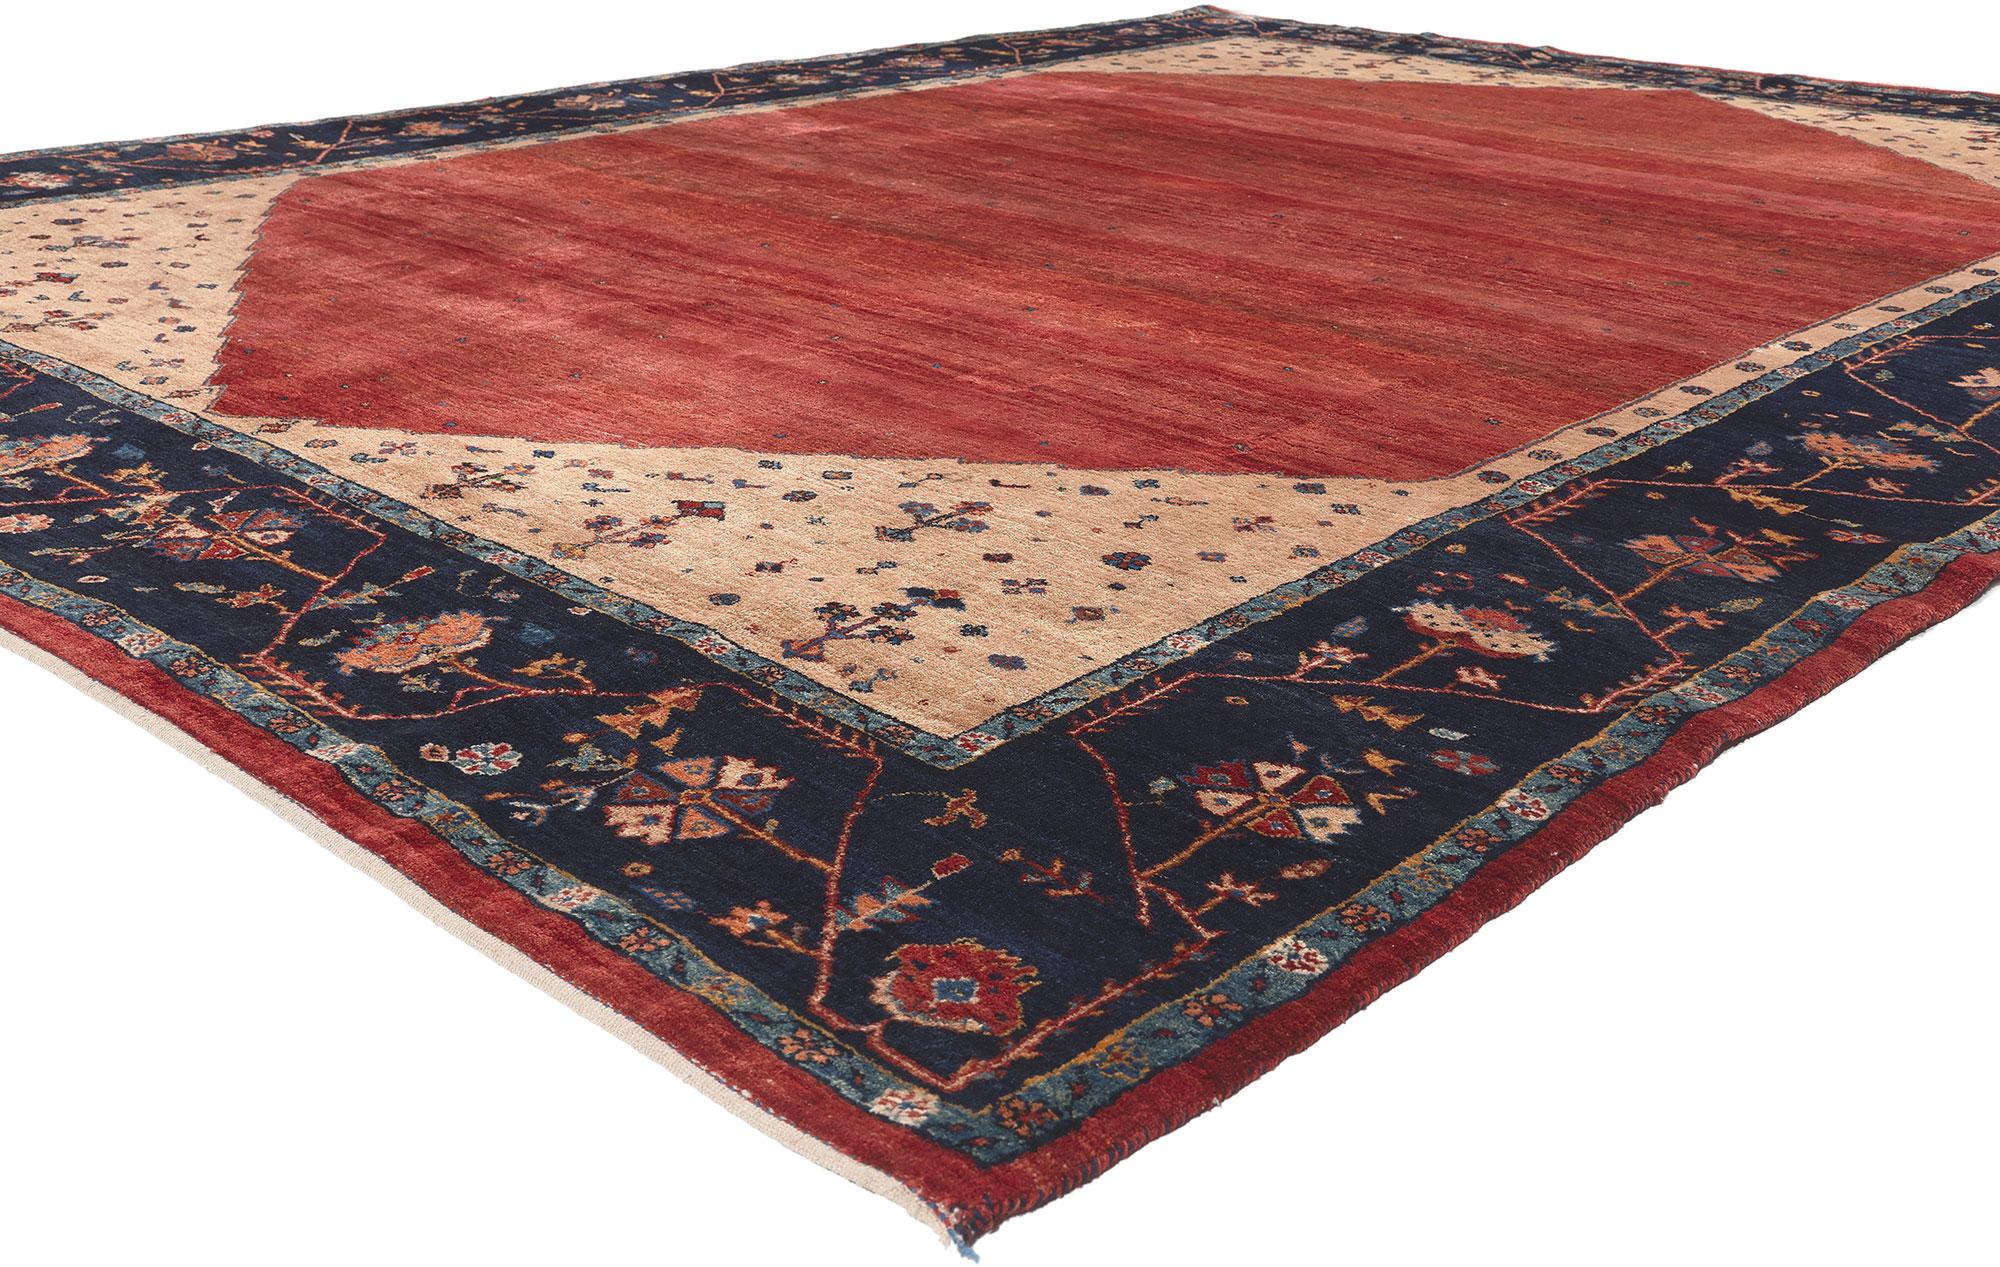 78567 Vintage Persian Gabbeh Rug, 08'06 x 11'03.
Emanating folk art warmth and traditional sensibility, this hand knotted wool vintage Persian Gabbeh rug is a captivating vision of woven beauty. The methodical design and refined colorway woven into